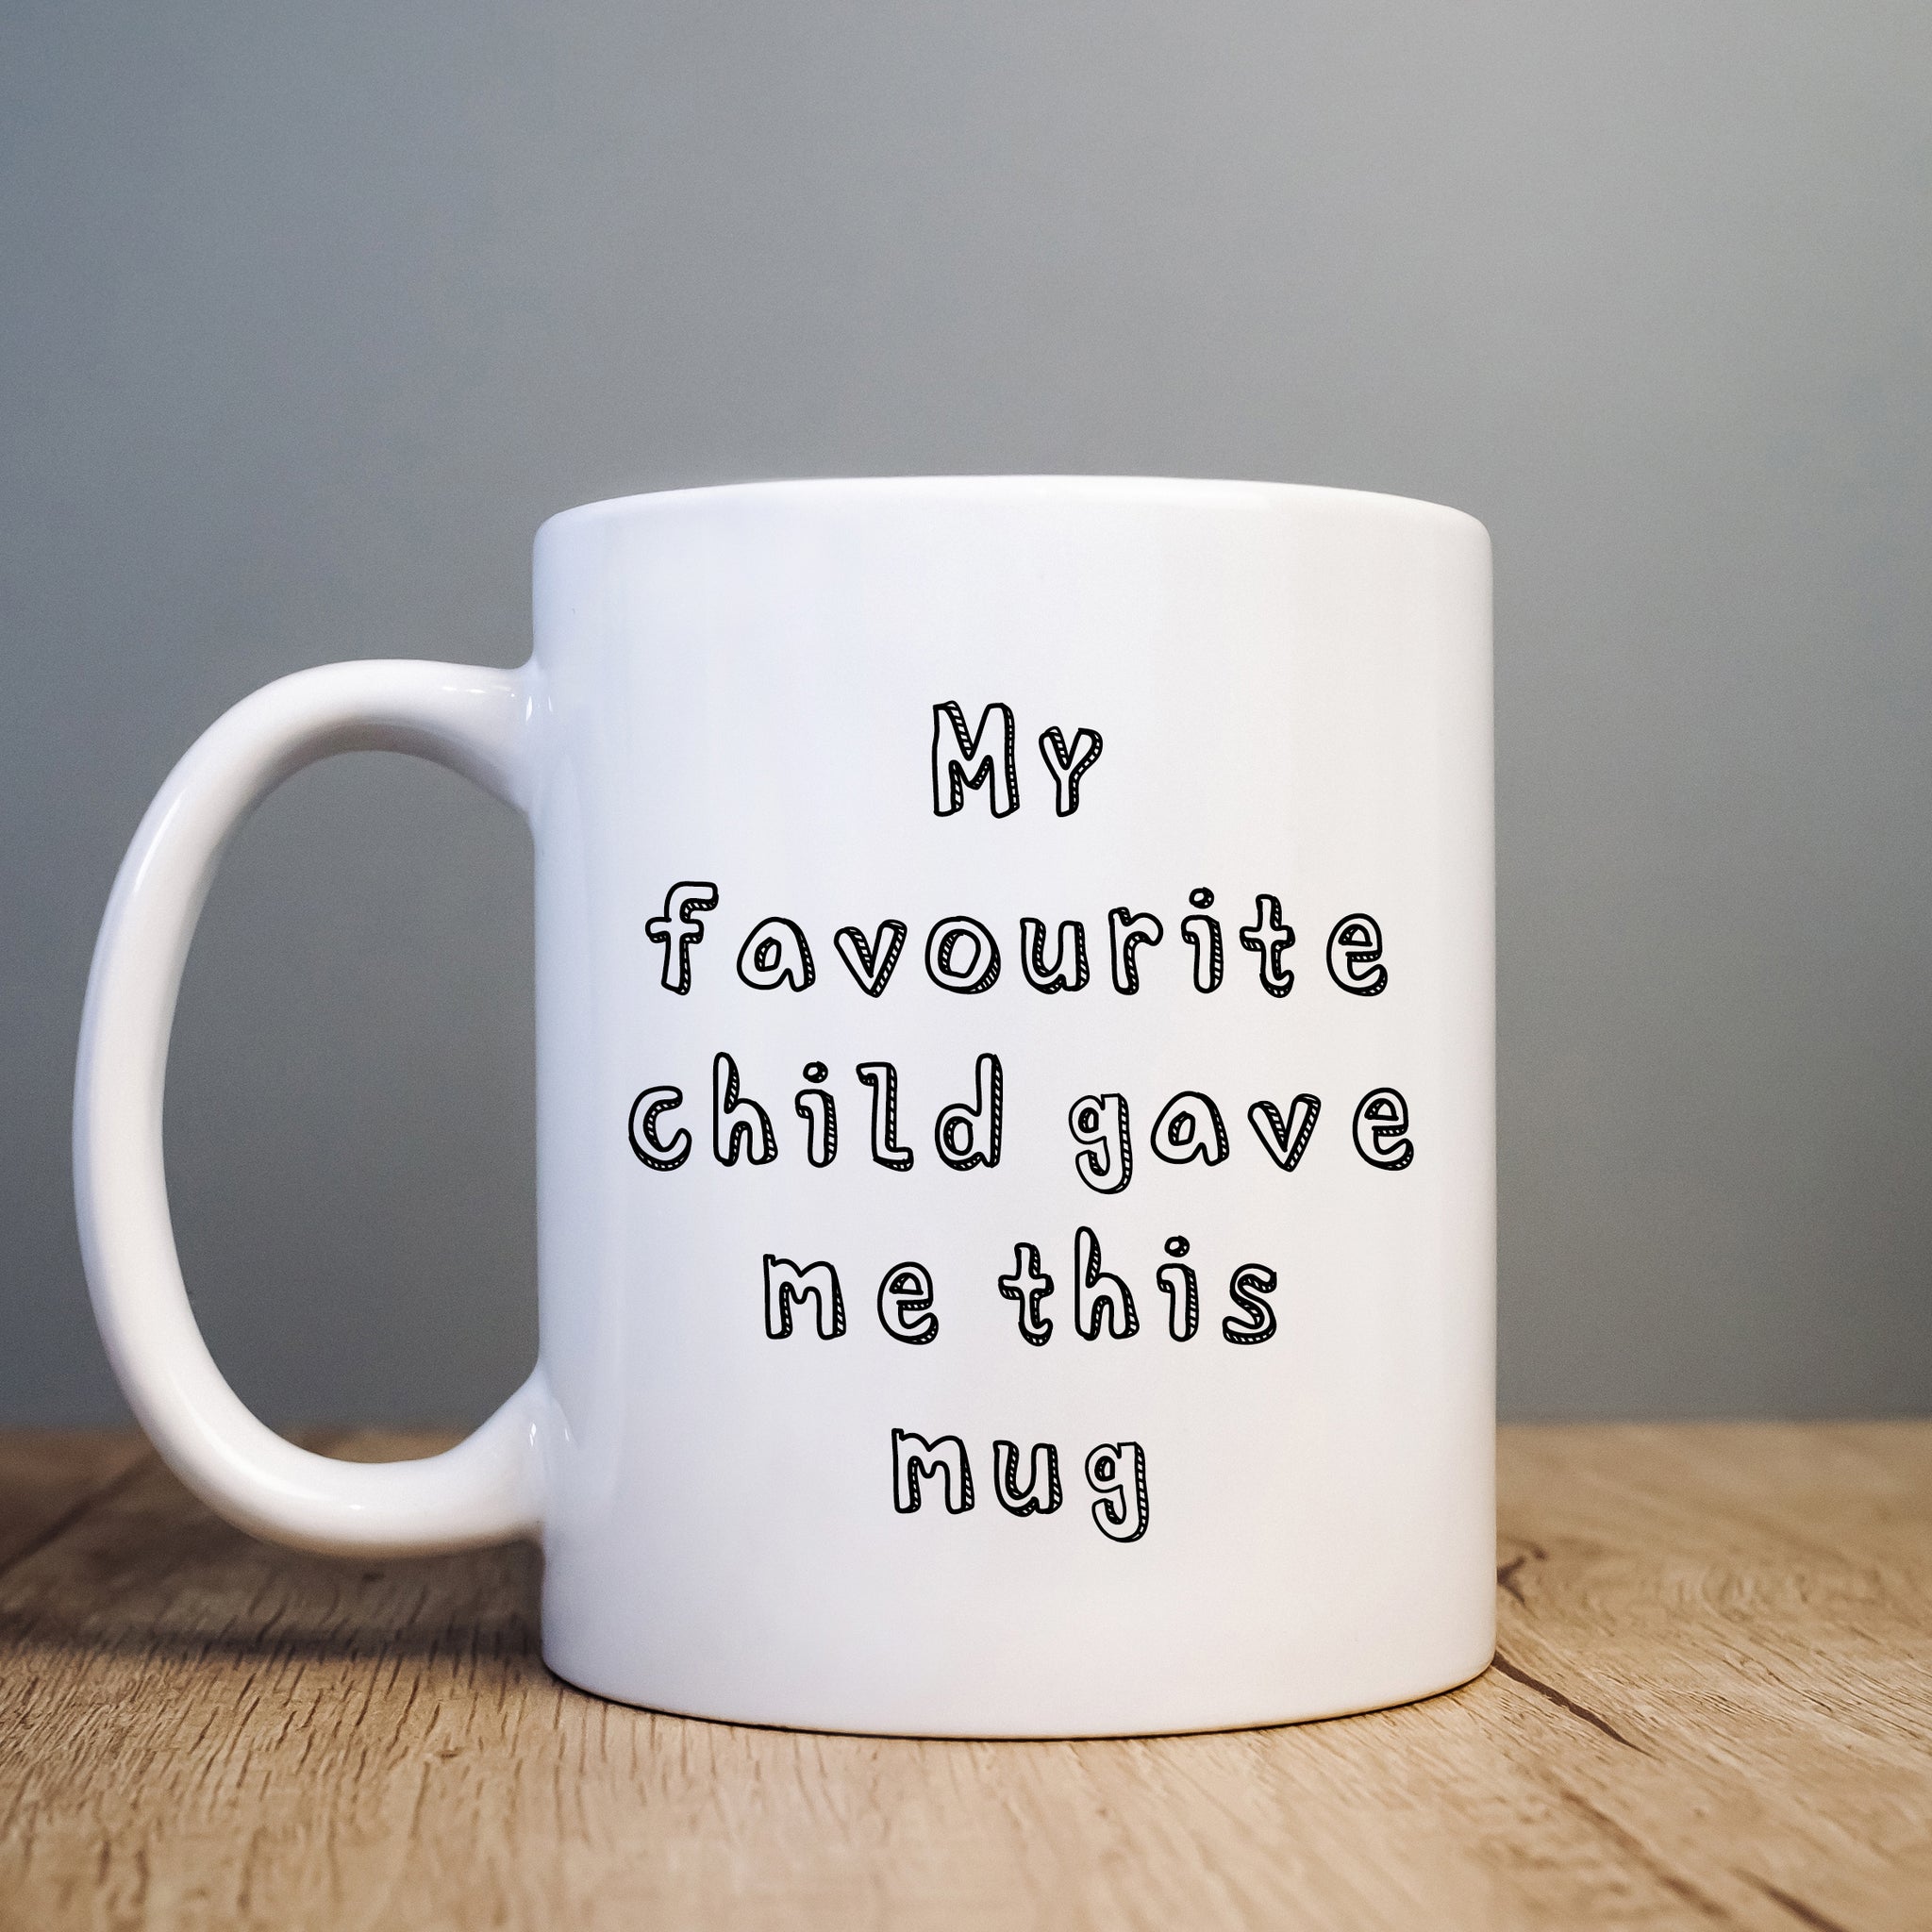 My Favourite Child Gave Me This Mug, Funny Coffee Cup Father's Day Birthday